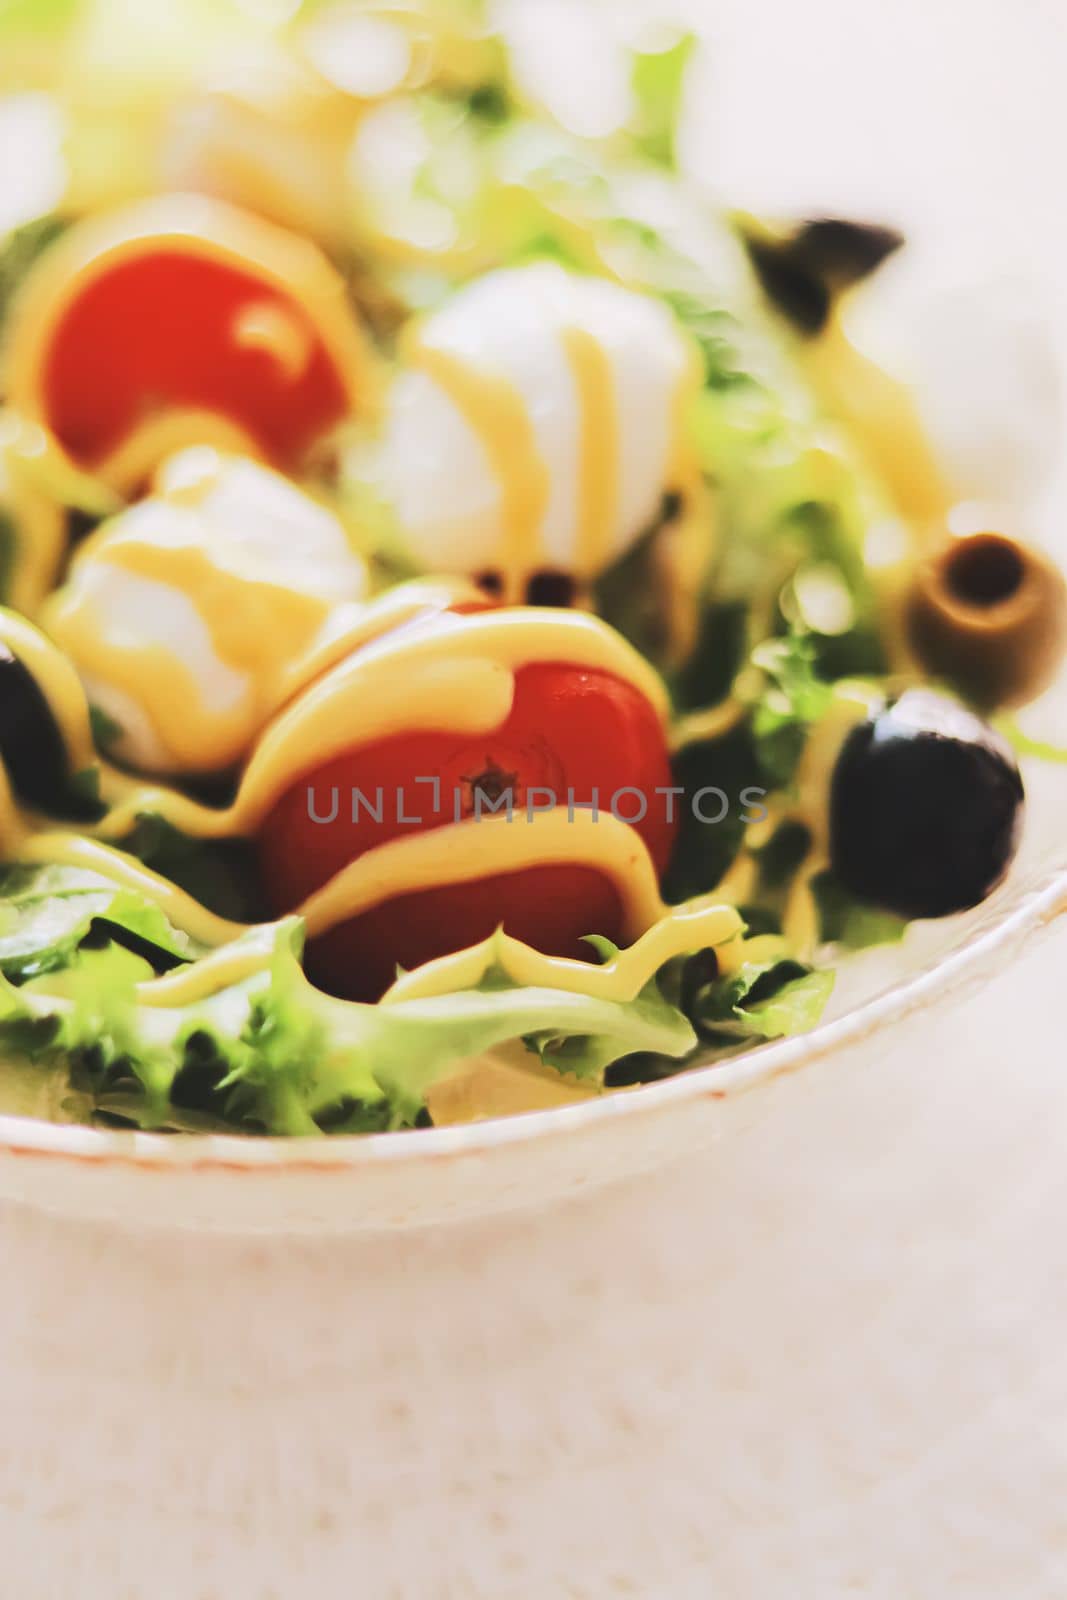 Food and diet, salad with fresh vegetables and mozzarella cheese as meal for lunch or dinner, tasty recipe by Anneleven